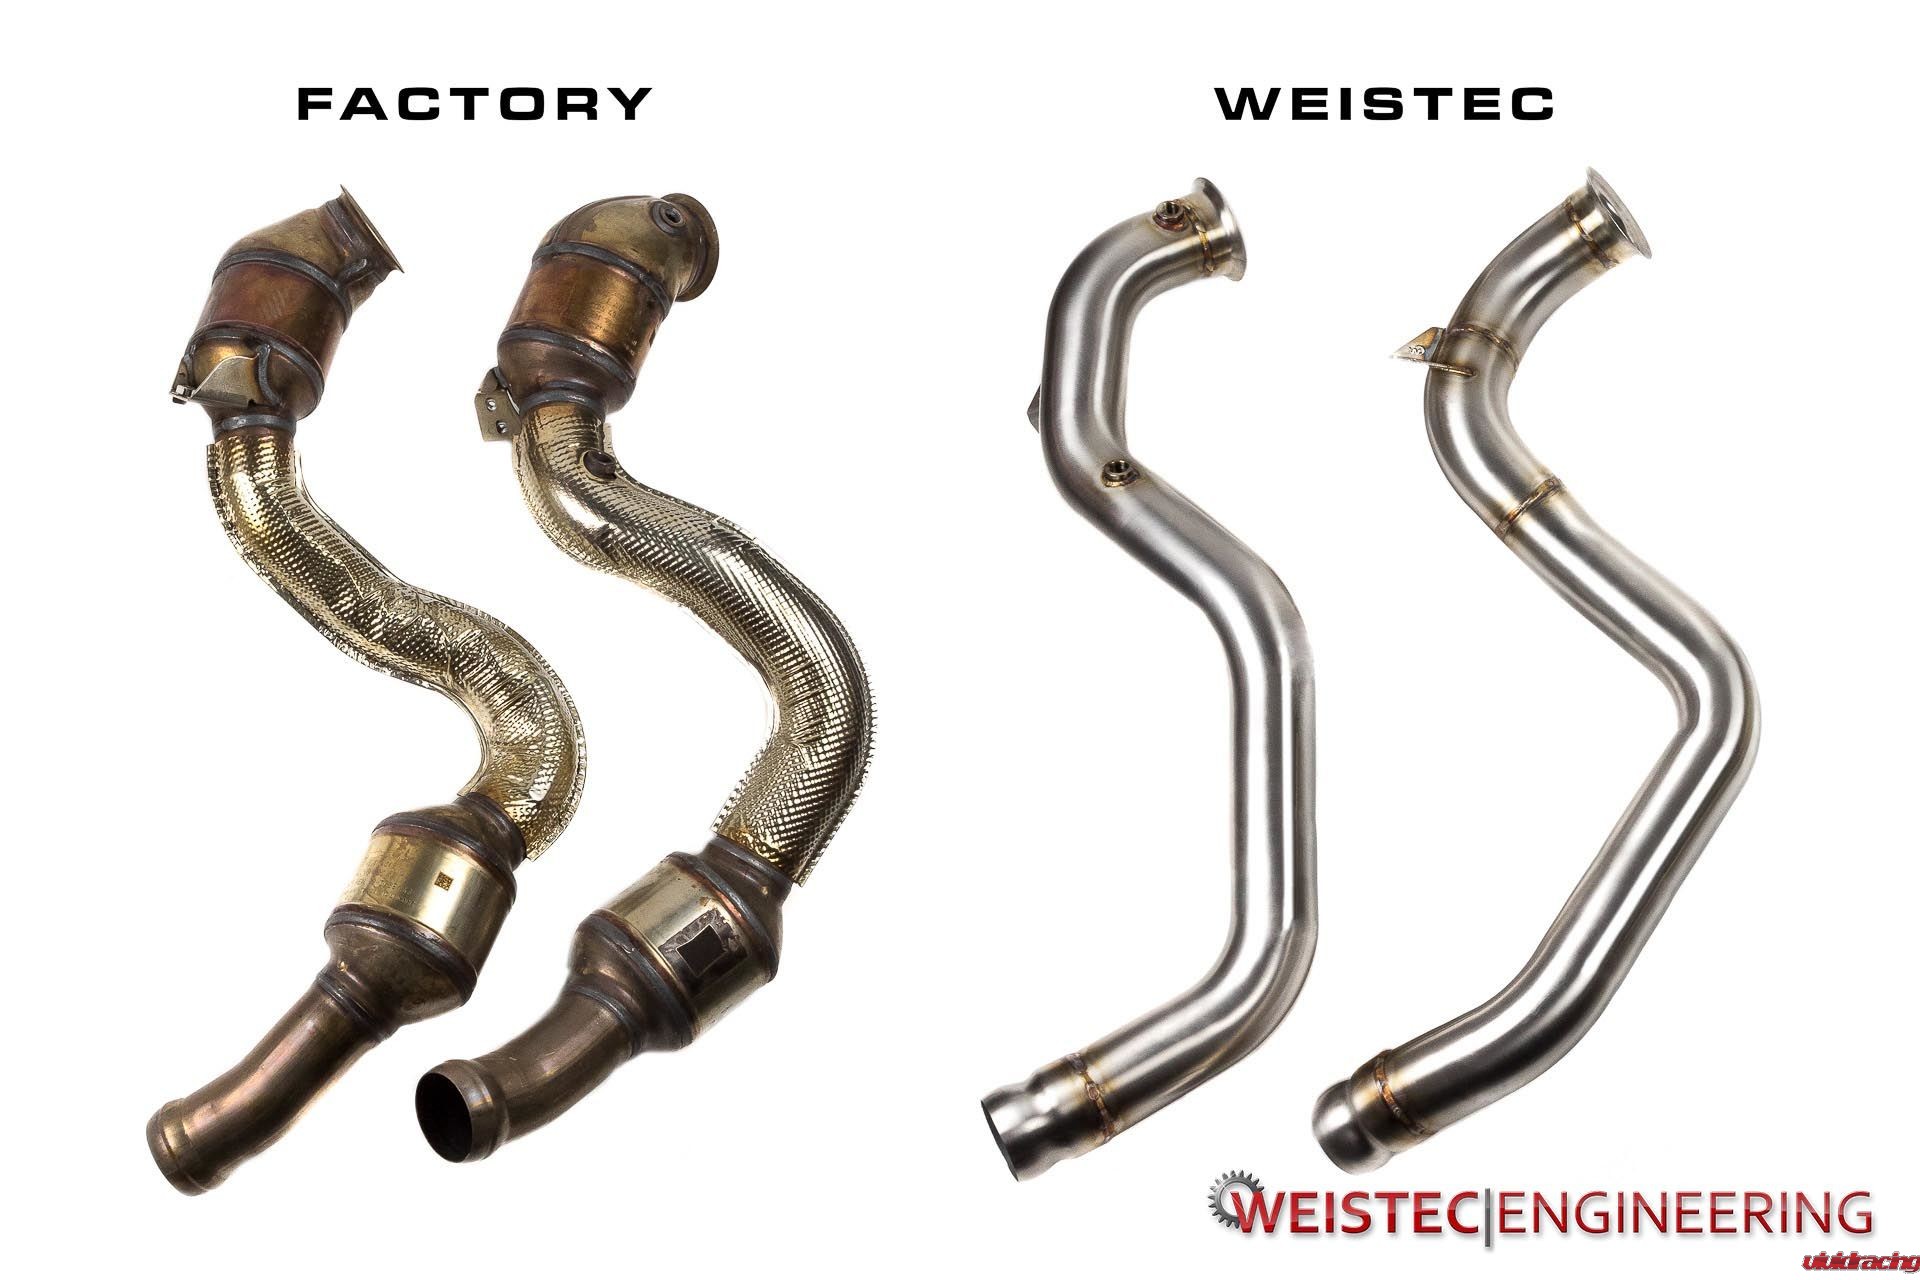 Weistec Engineering, promotion, bypass valve, ECU tuning, downpipes